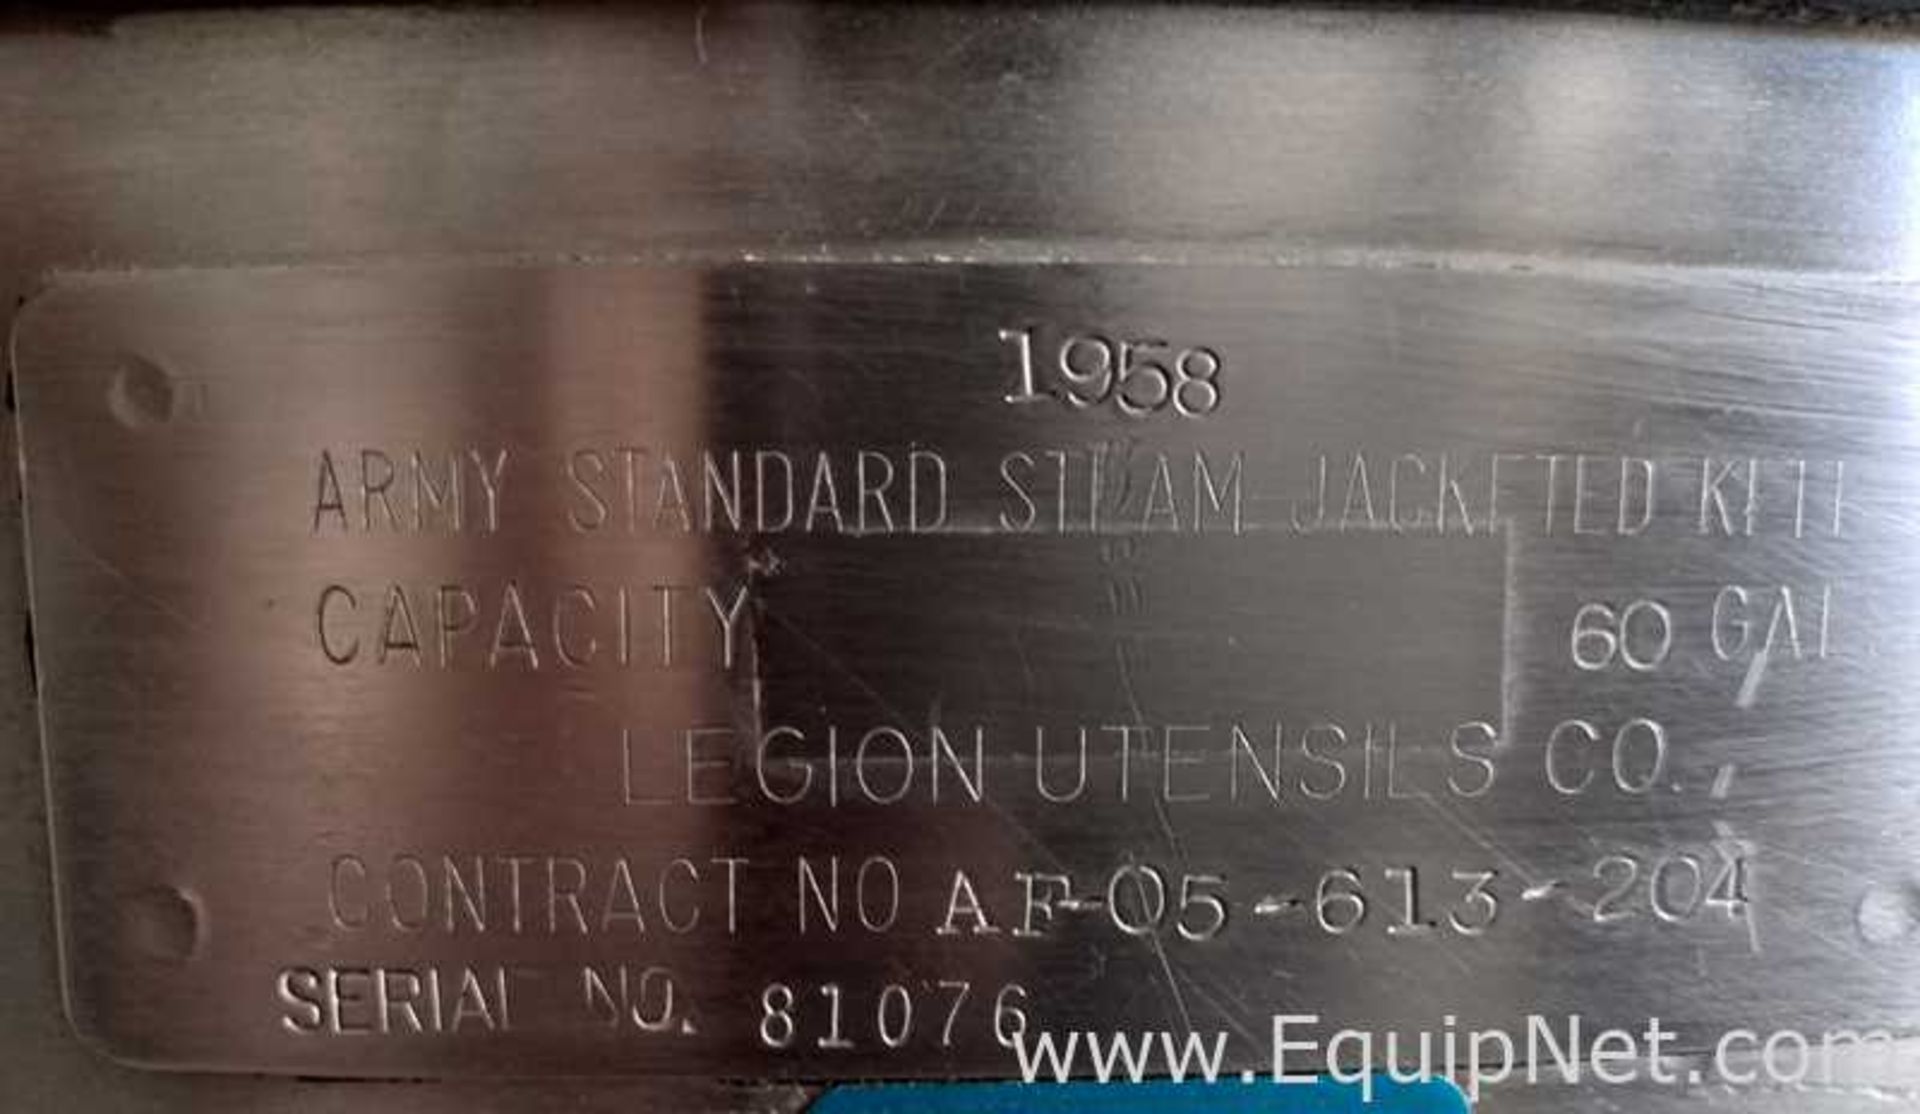 Legions Utensils 60 Gallon Stainless Steel Jacketed Kettle - Image 4 of 5